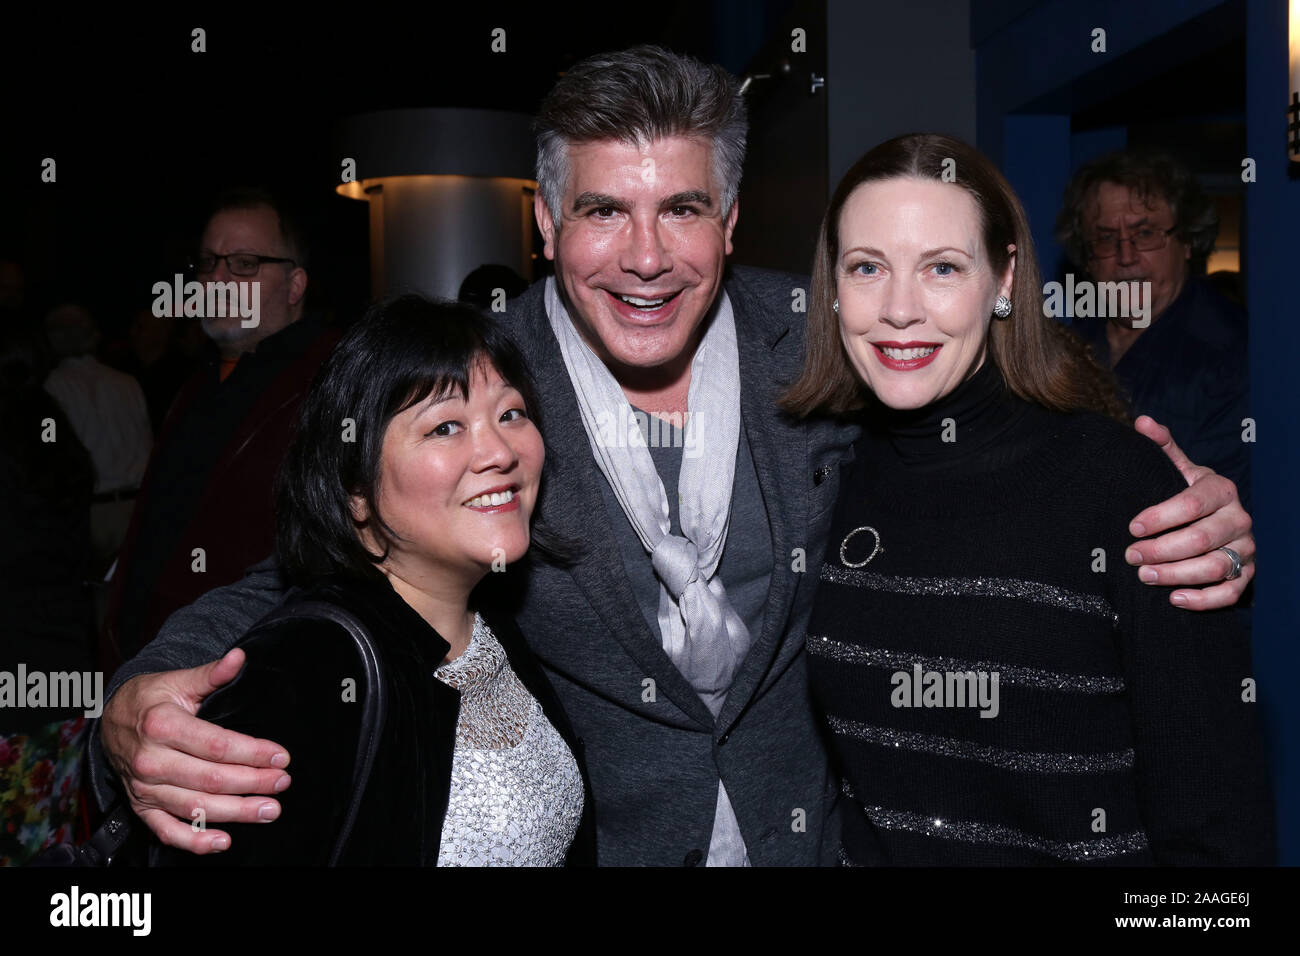 Red Bull Theater Benefit Concert of Return To The Forbidden Planet at Symphony Space - Arrivals. Featuring: Ann Harada, Bryan Batt, Veanne Cox Where: New York, New York, United States When: 22 Oct 2019 Credit: Joseph Marzullo/WENN.com Stock Photo